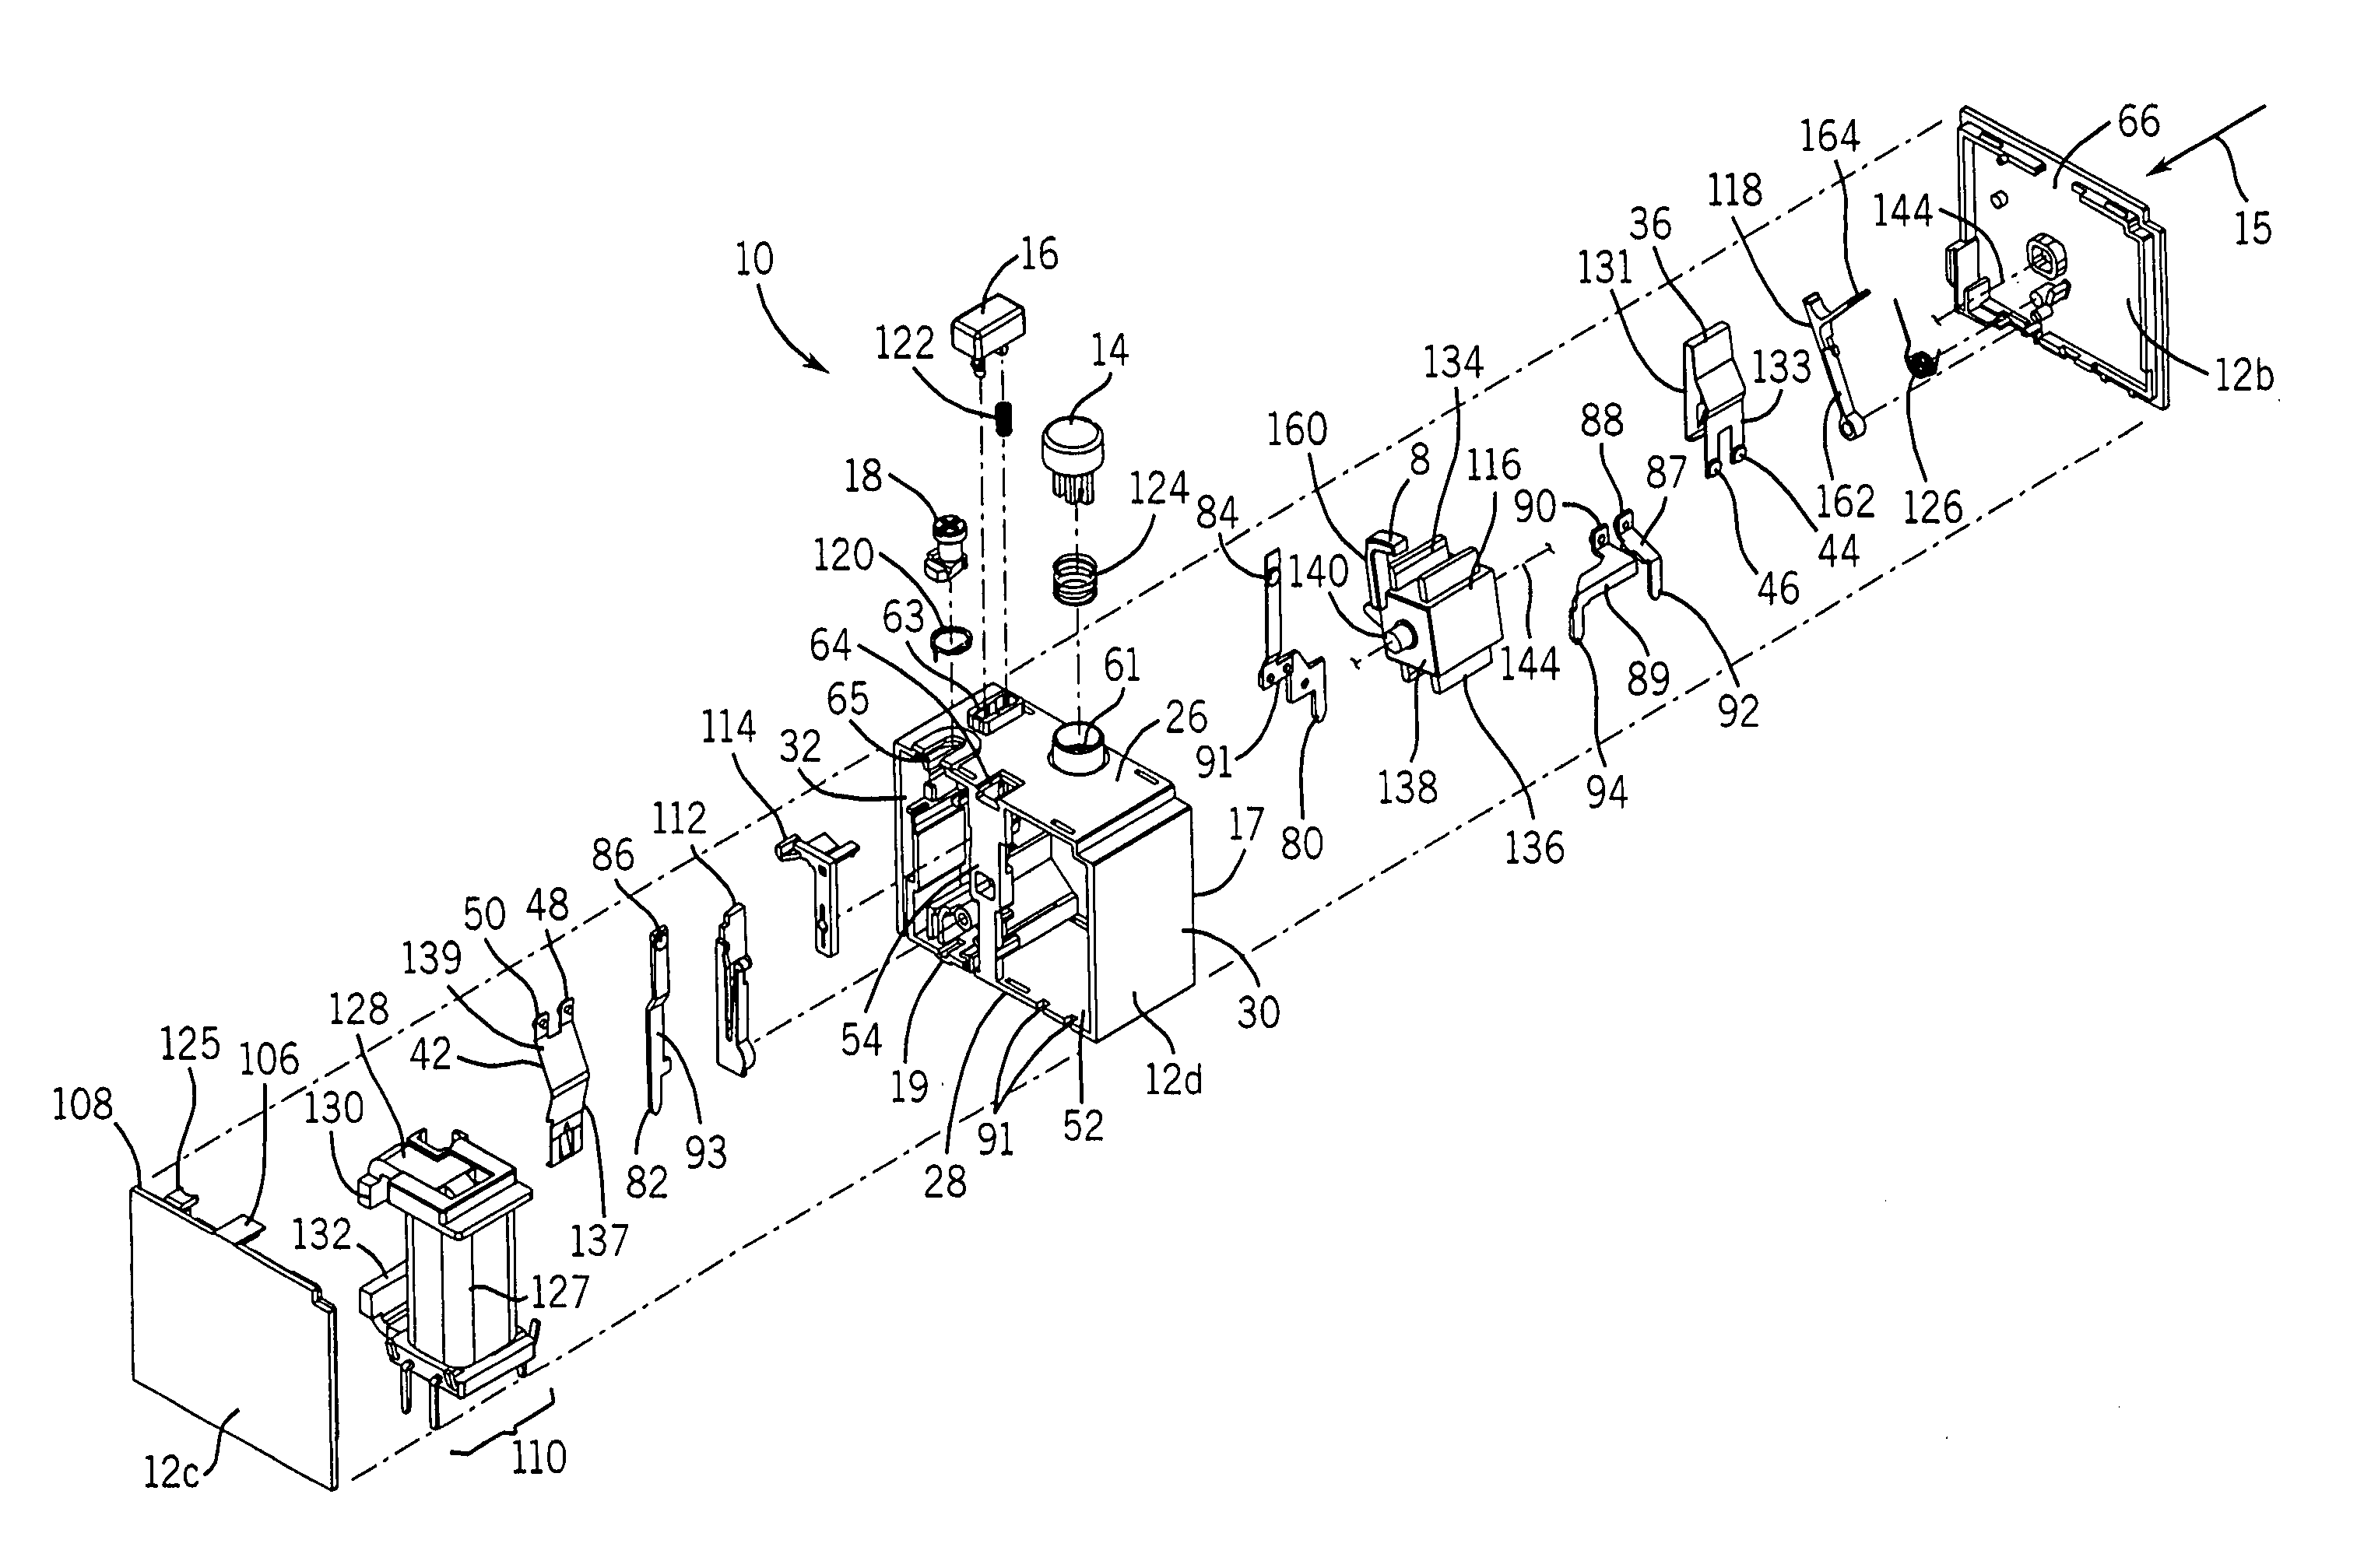 Trip-free PCB mountable relay configuration and method